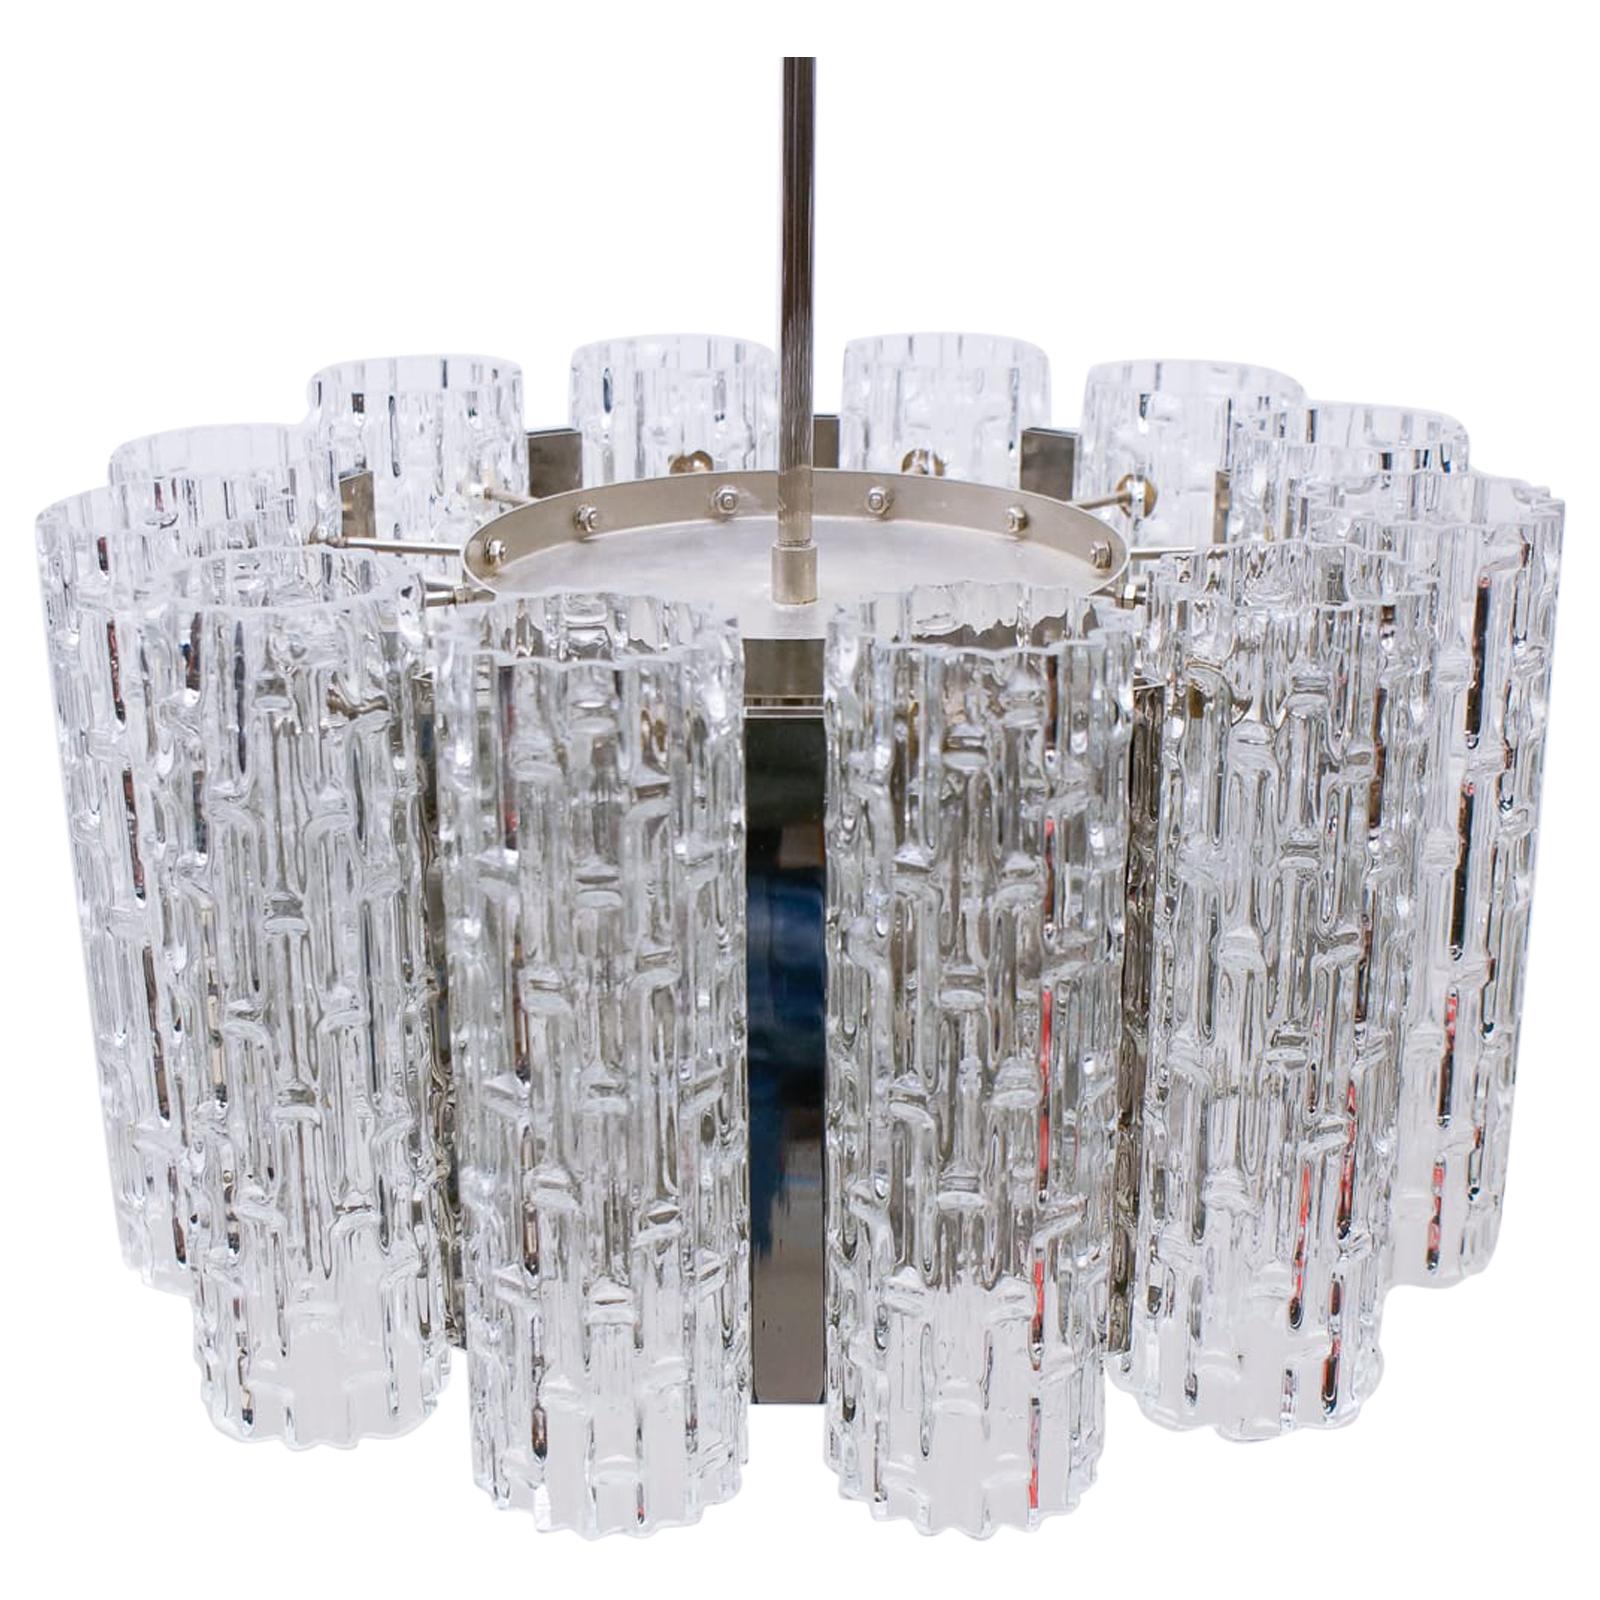 Ceiling Lamp with 12 Textured Glass Shades, Kaiser Leuchten Germany, 1960s